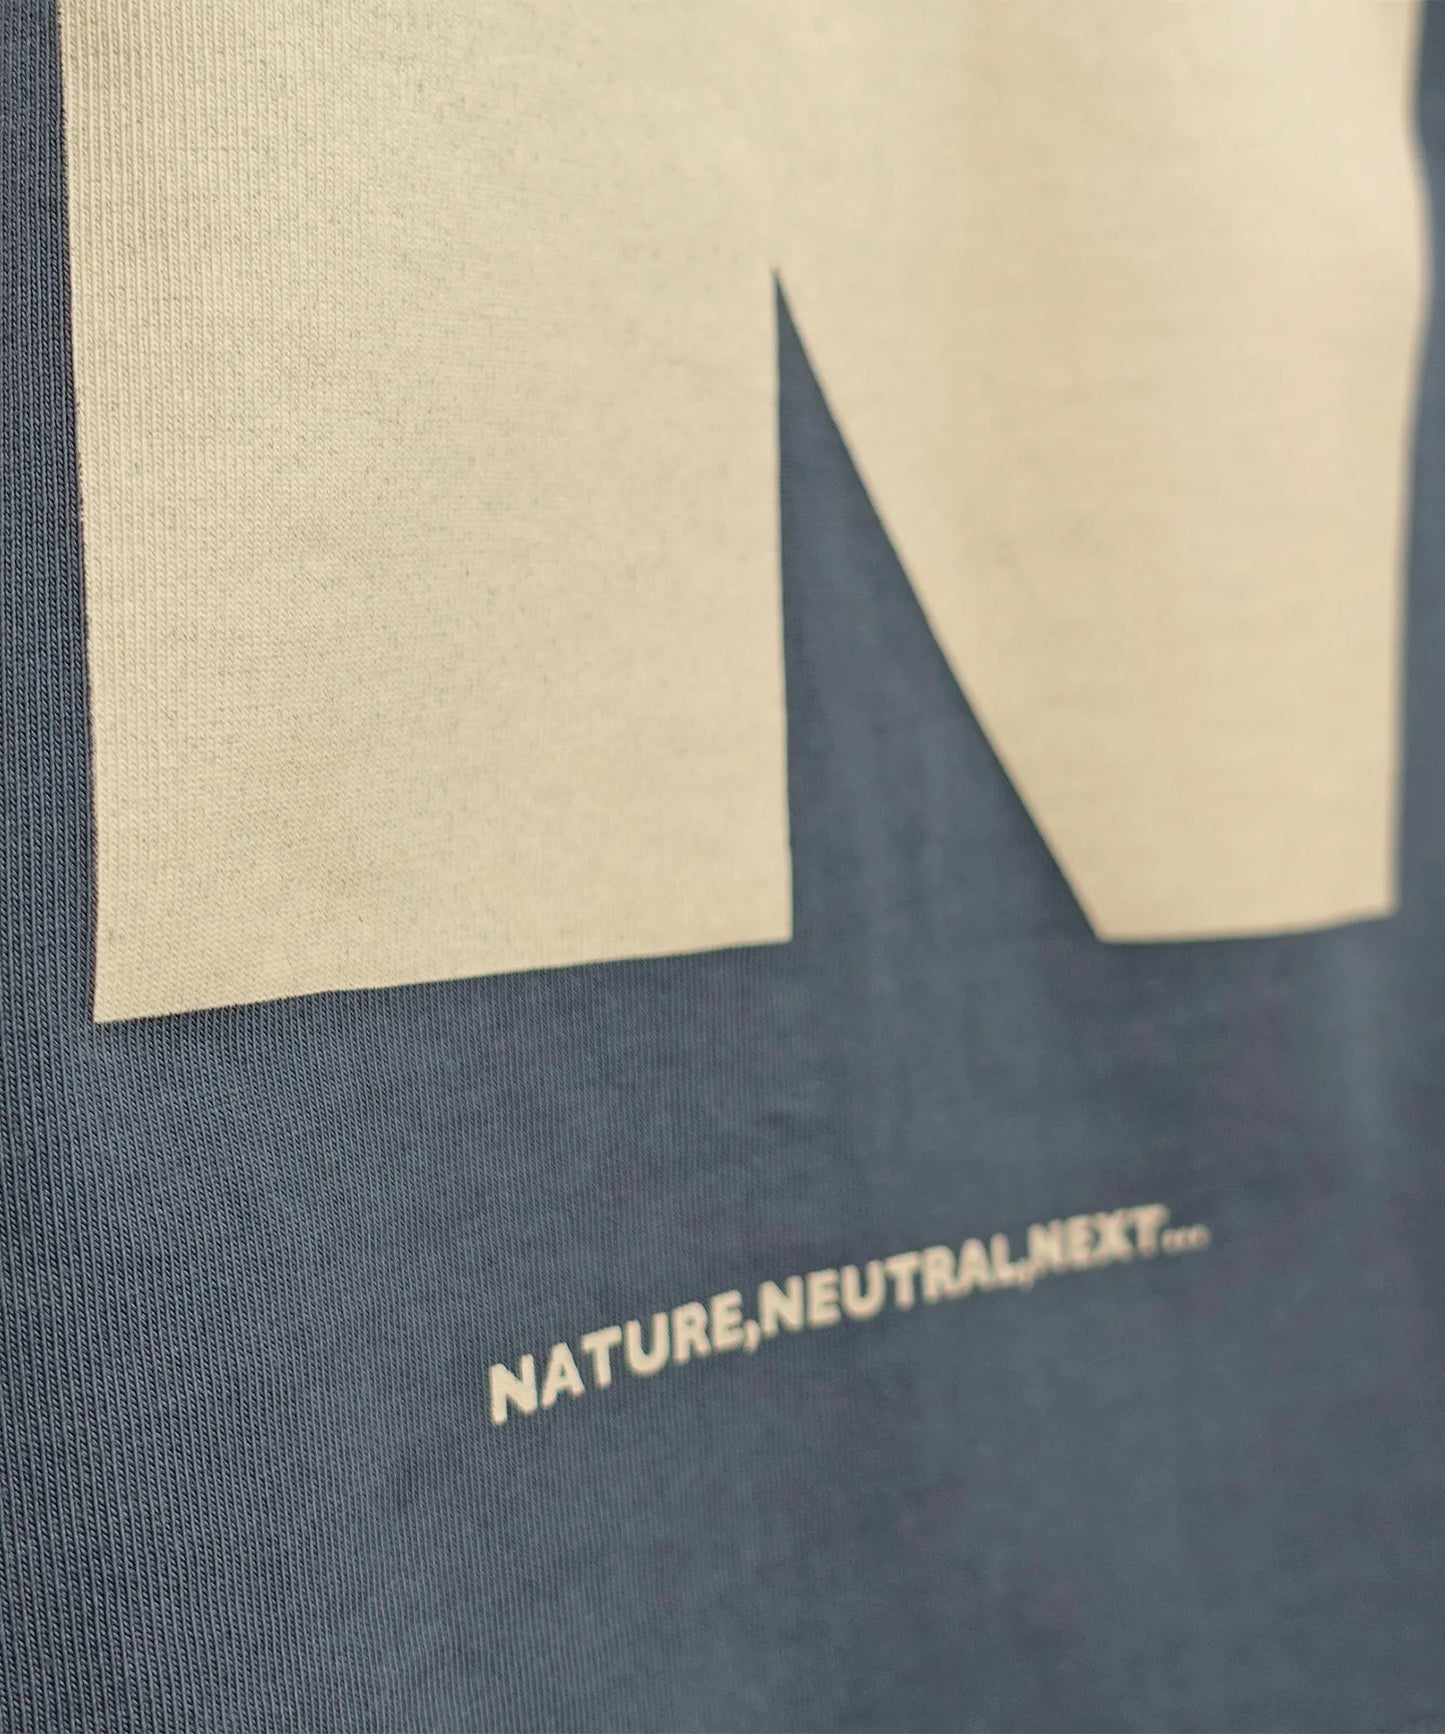 [Environmentally friendly material] OG CLEAR COTTON BIG”N” L/S TEE Organic cotton gas-fired jersey [100-145cm]